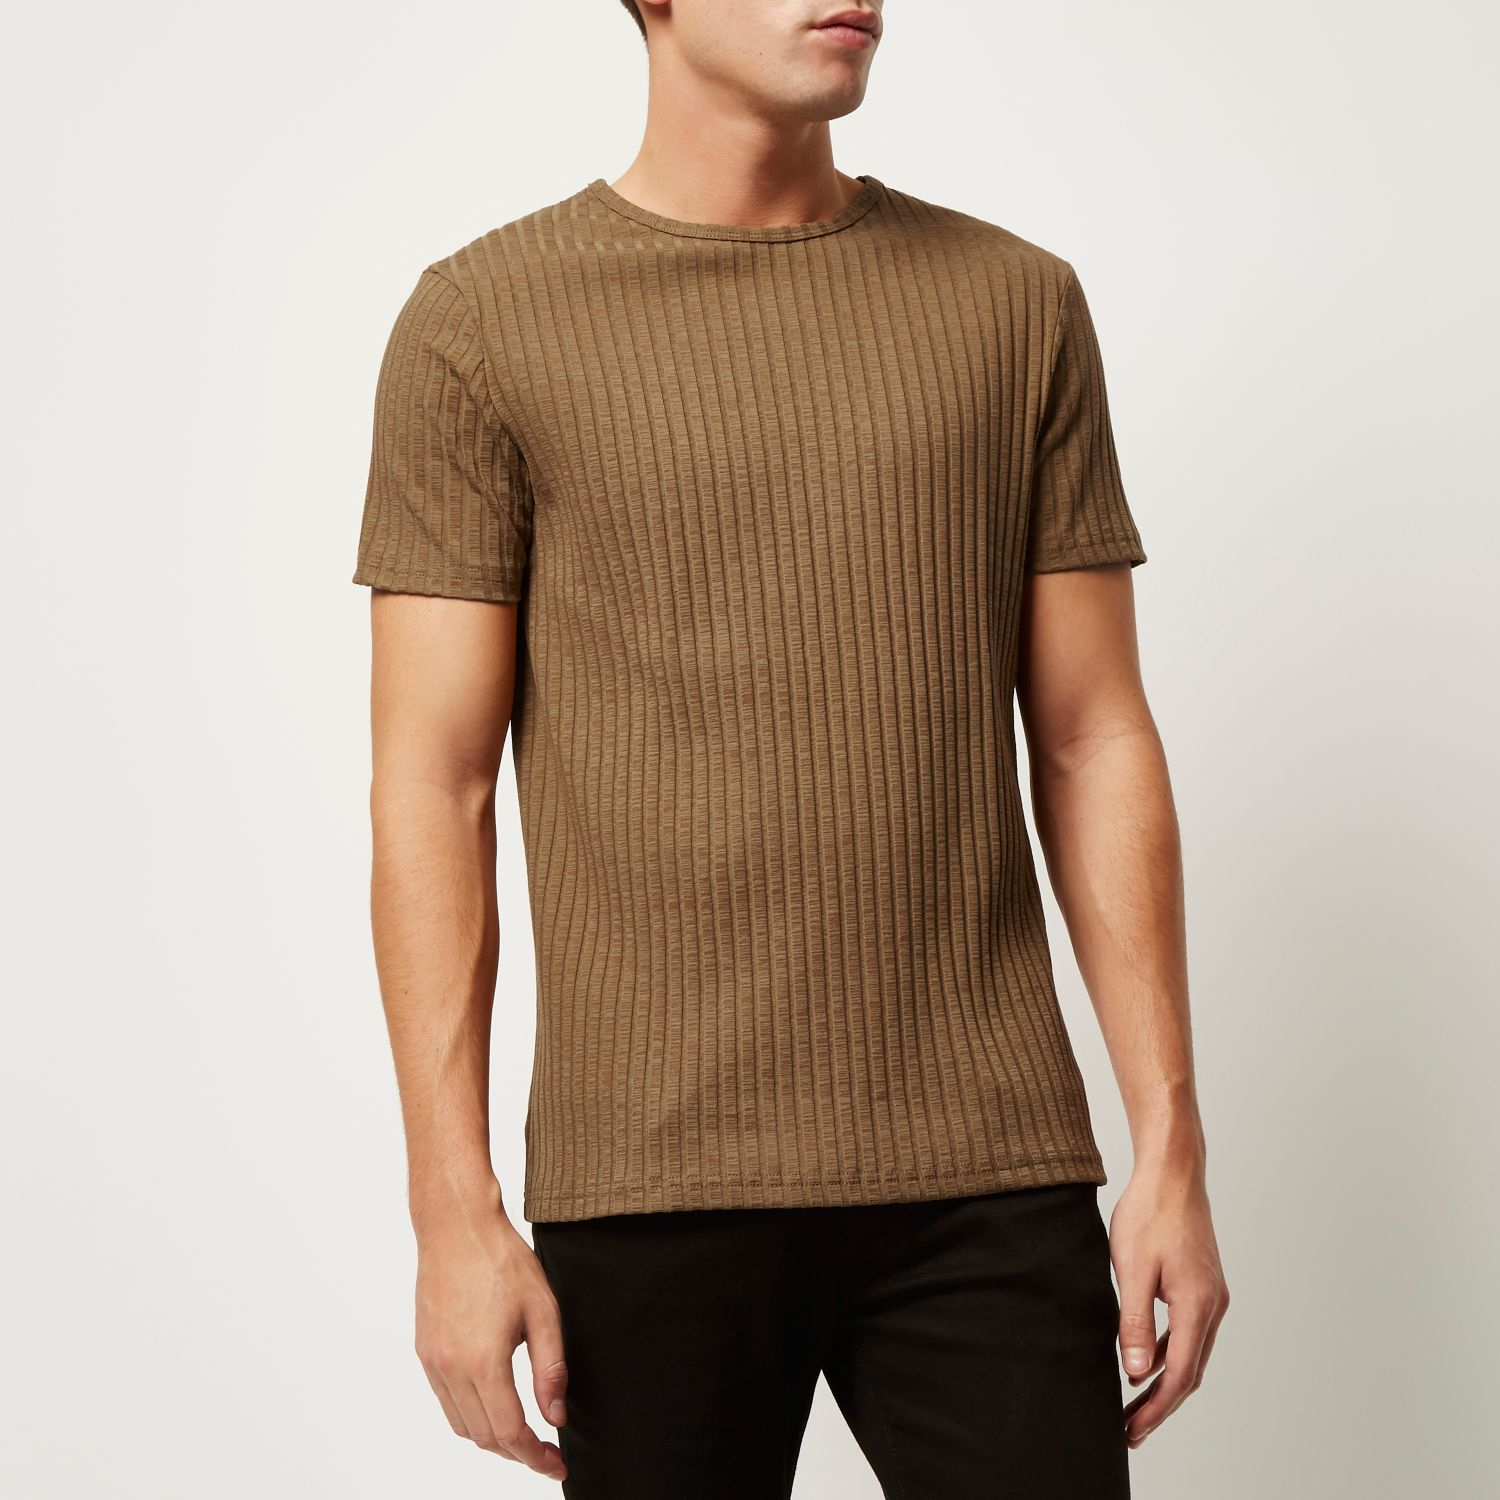 Lyst - River Island Light Brown Chunky Ribbed T-shirt in Brown for Men